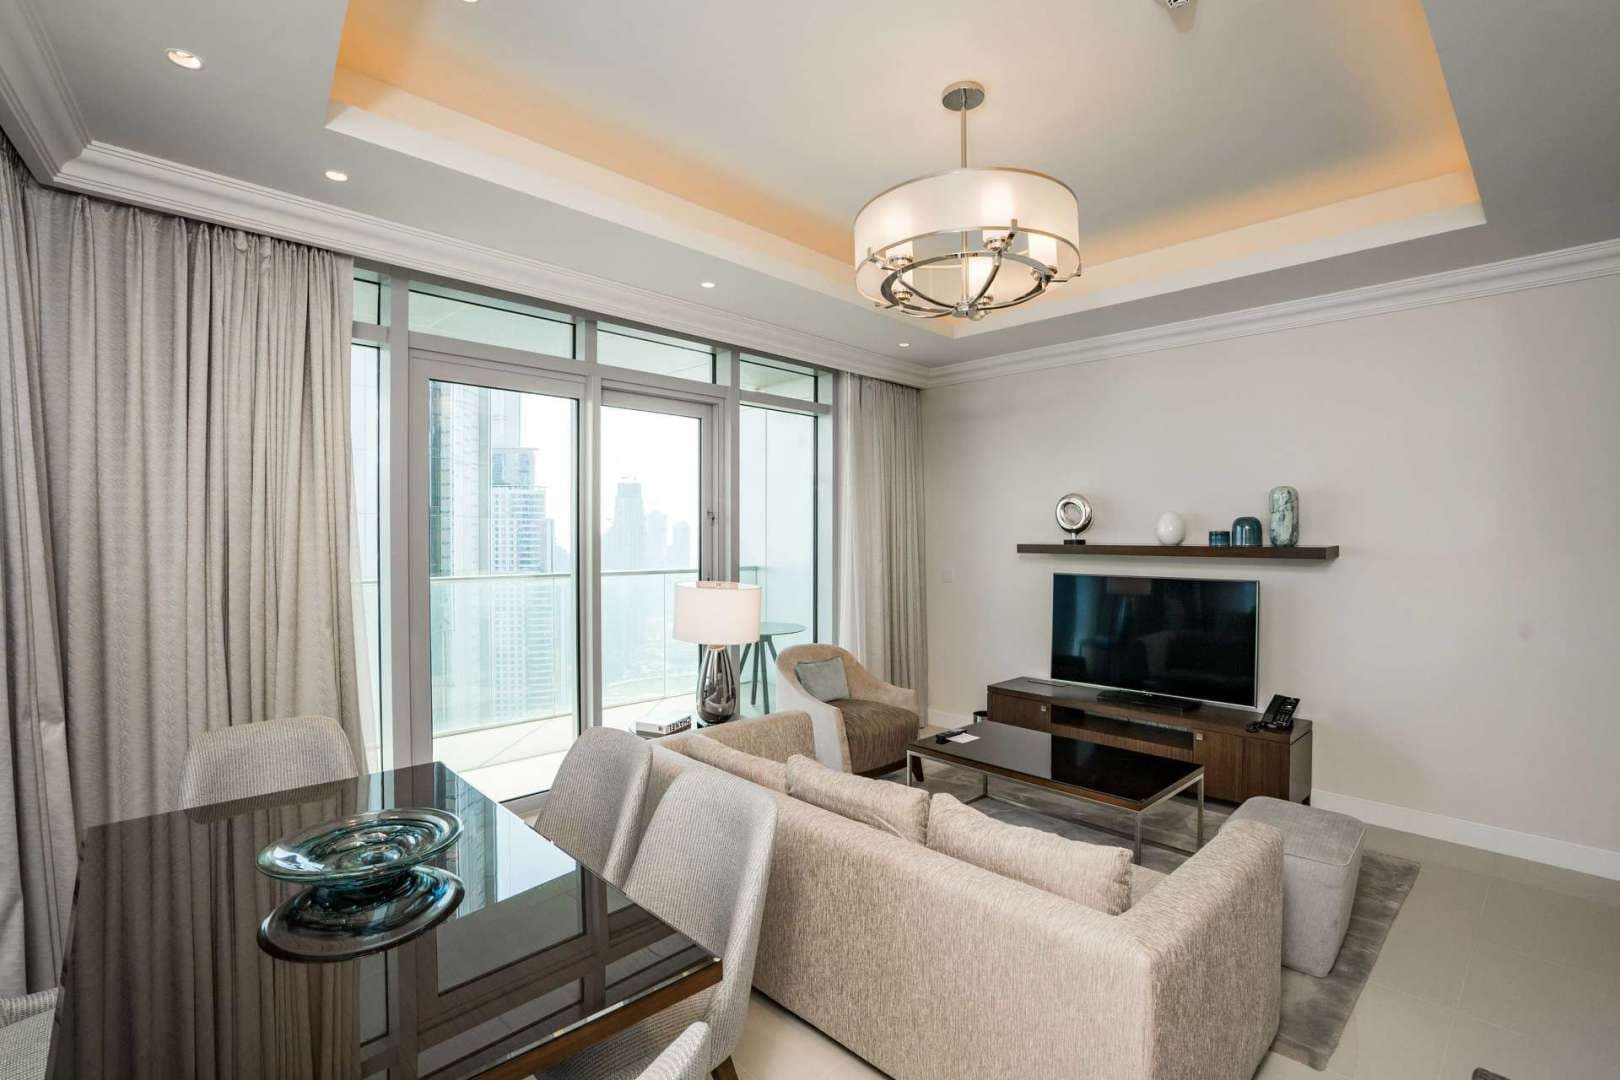 2 Bedroom Apartment For Sale The Address Residence Fountain Views Lp06532 Aa8844caaac1c00.jpg